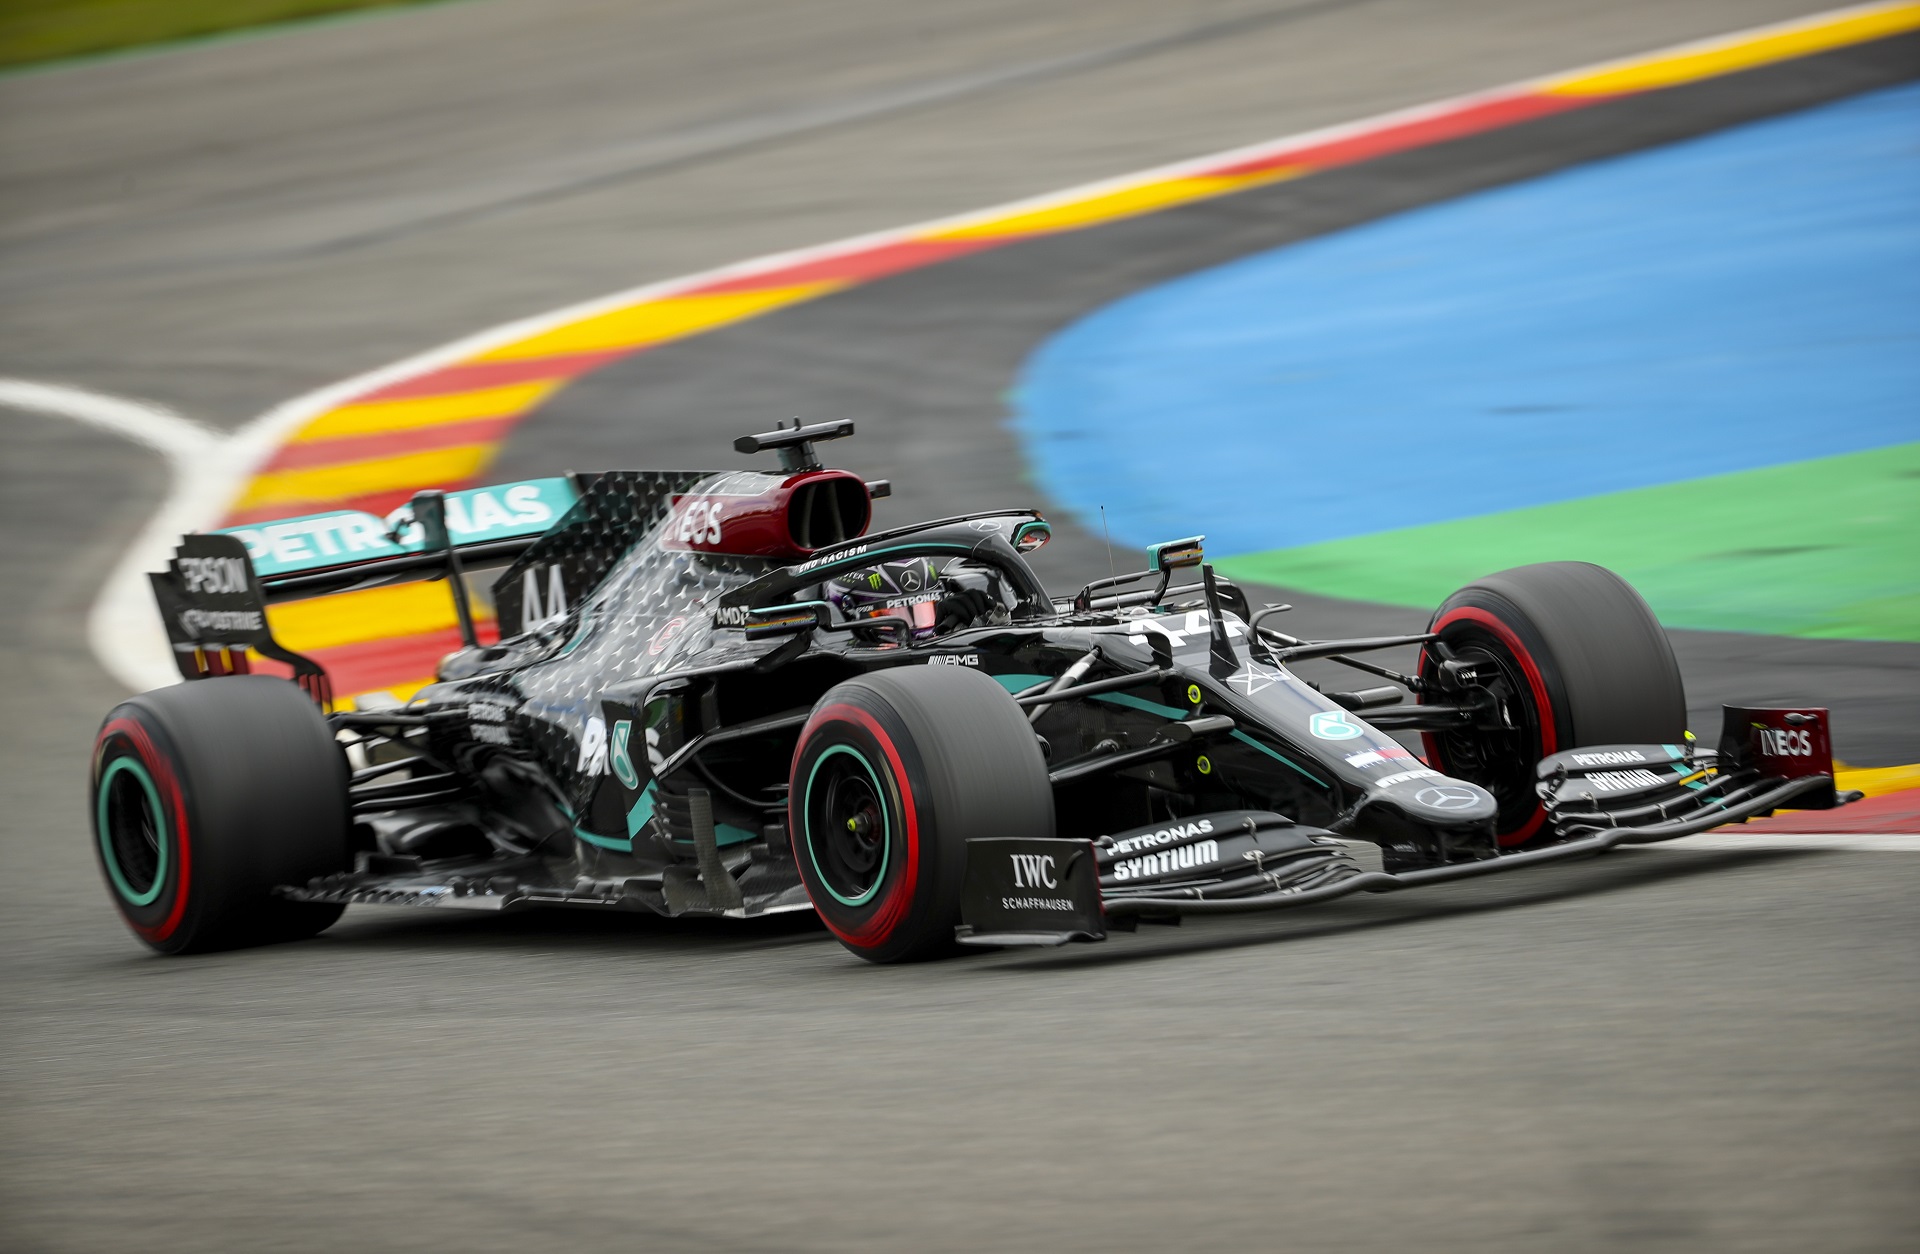 epa08633755 British Formula One driver Lewis Hamilton of Mercedes-AMG Petronas in action during the qualifying session at the Spa-Francorchamps race track in Stavelot, Belgium, 29 August 2020. The 2020 Formula One Grand Prix of Belgium will take place on 30 August 2020.  EPA/Francisco Seco / Pool